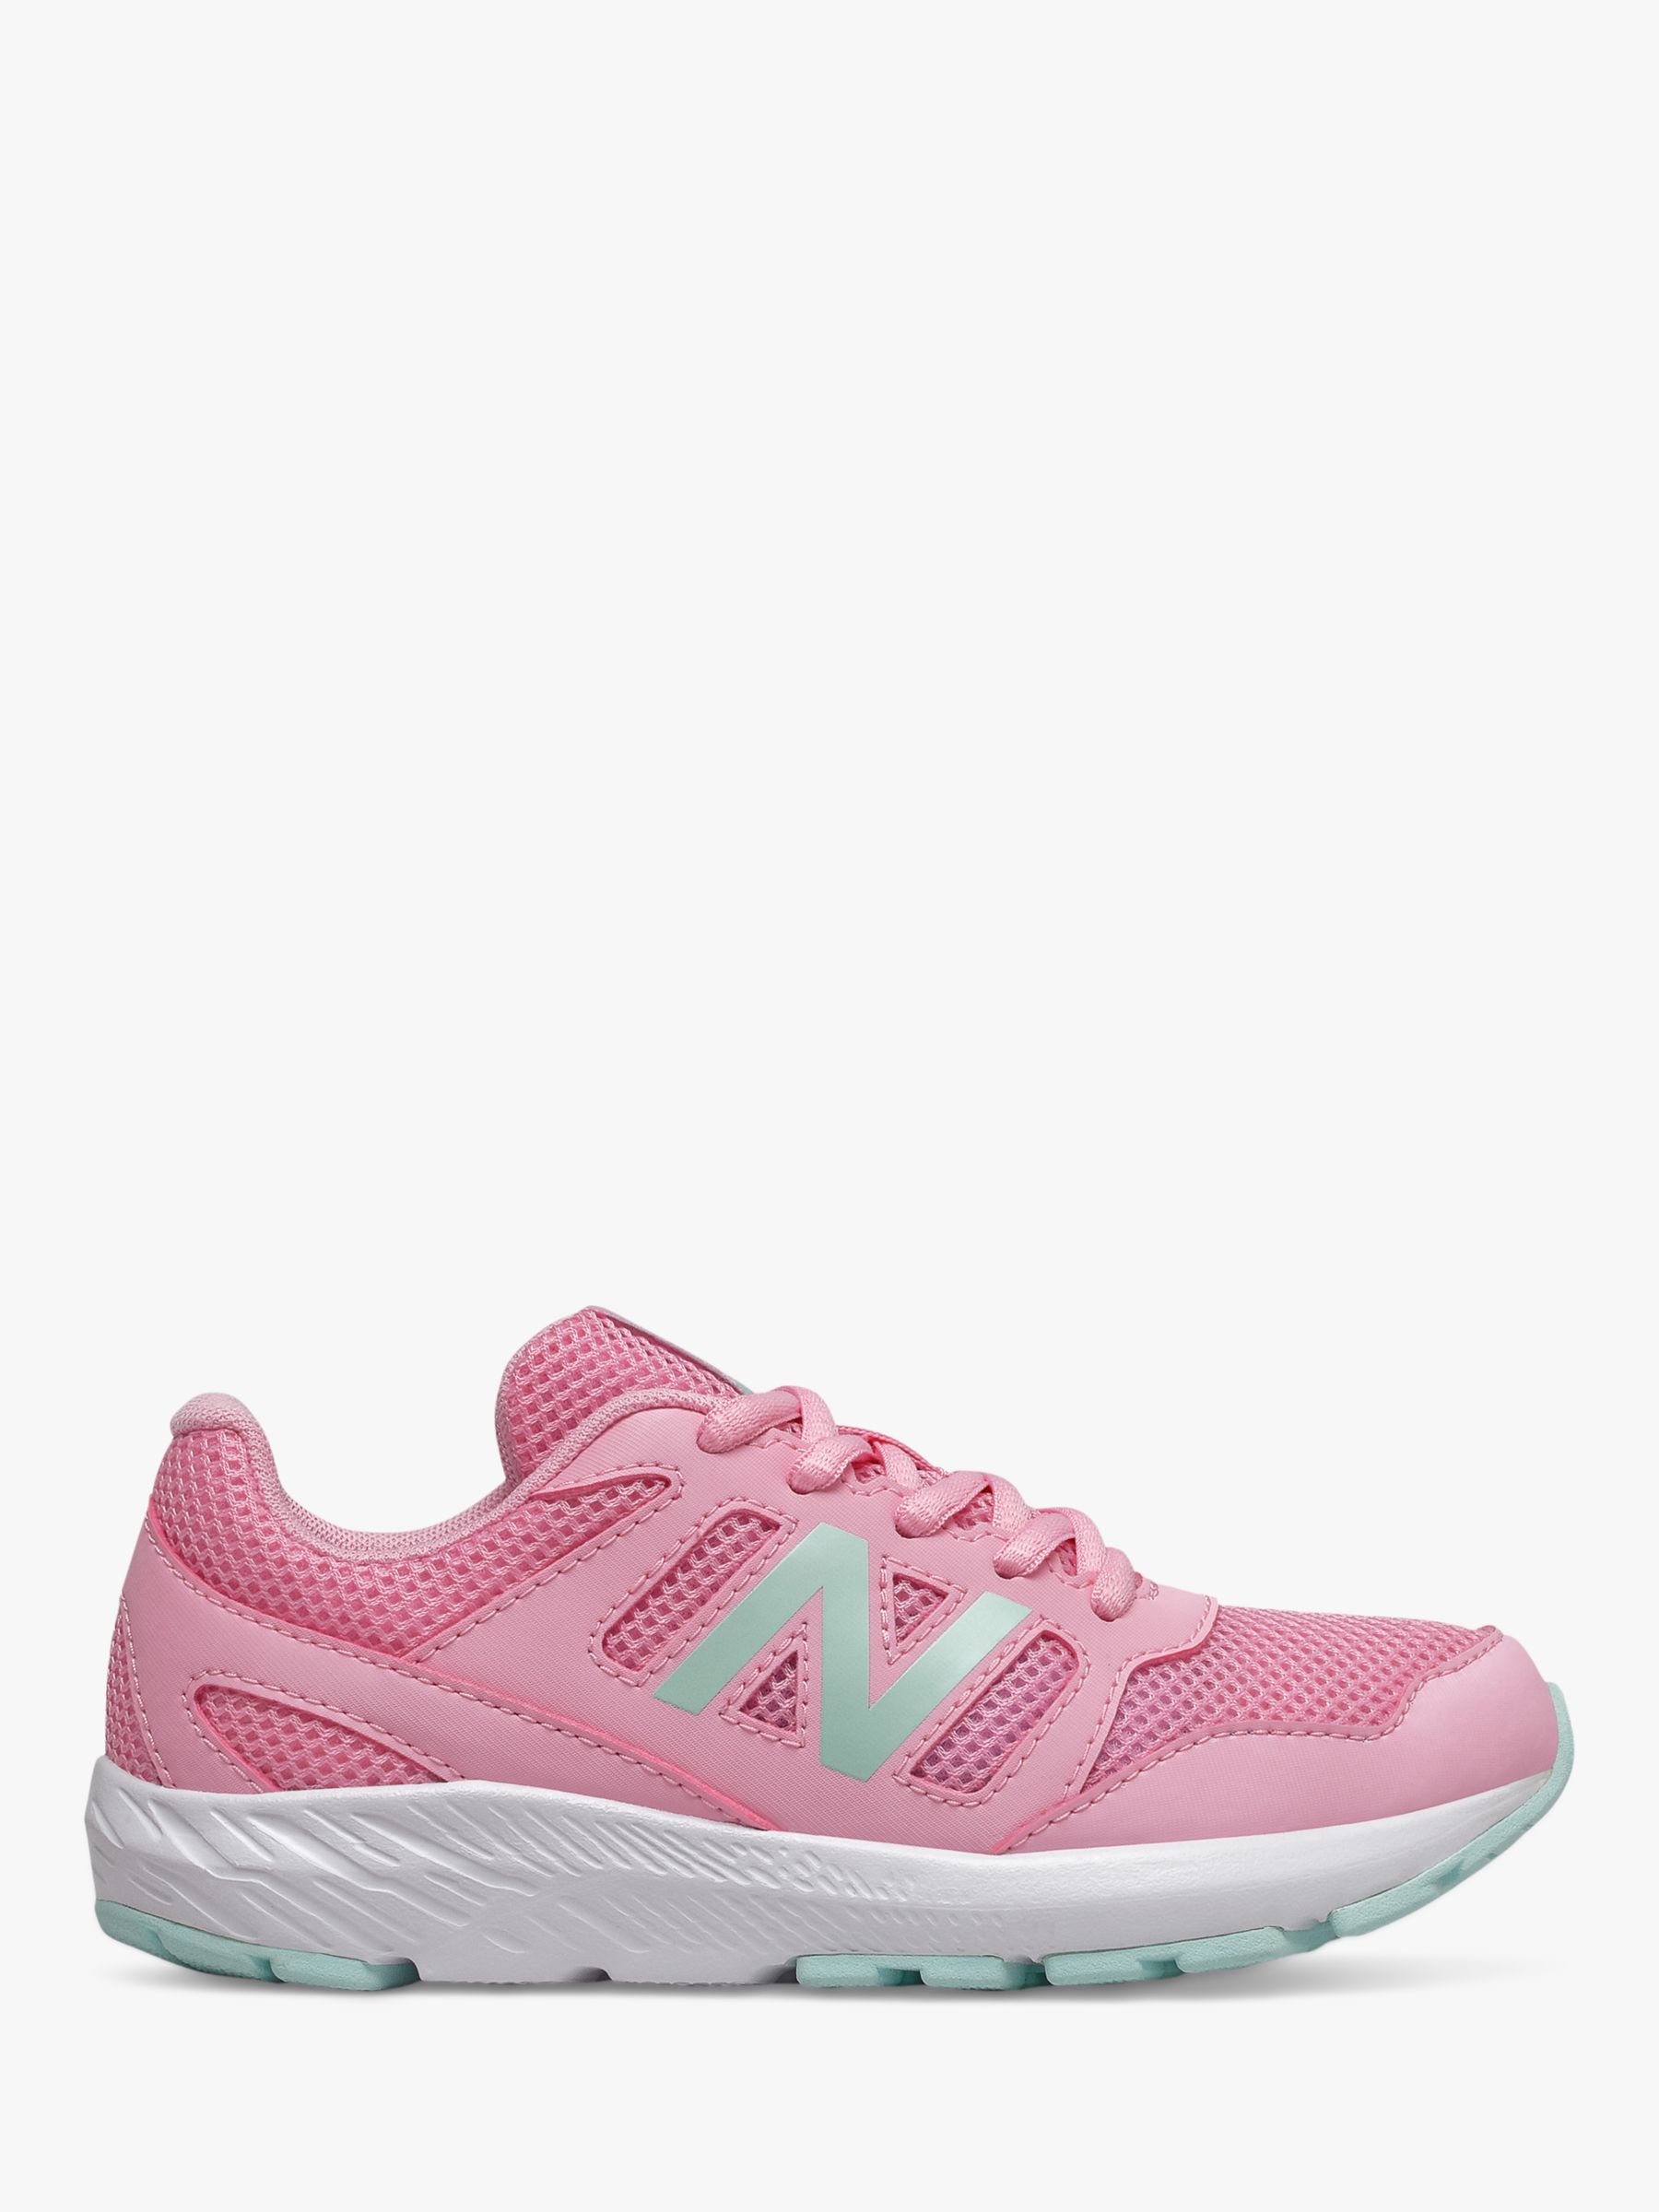 New Balance Children's 570 Lace Up Trainers, Pink/White Mint at John ...